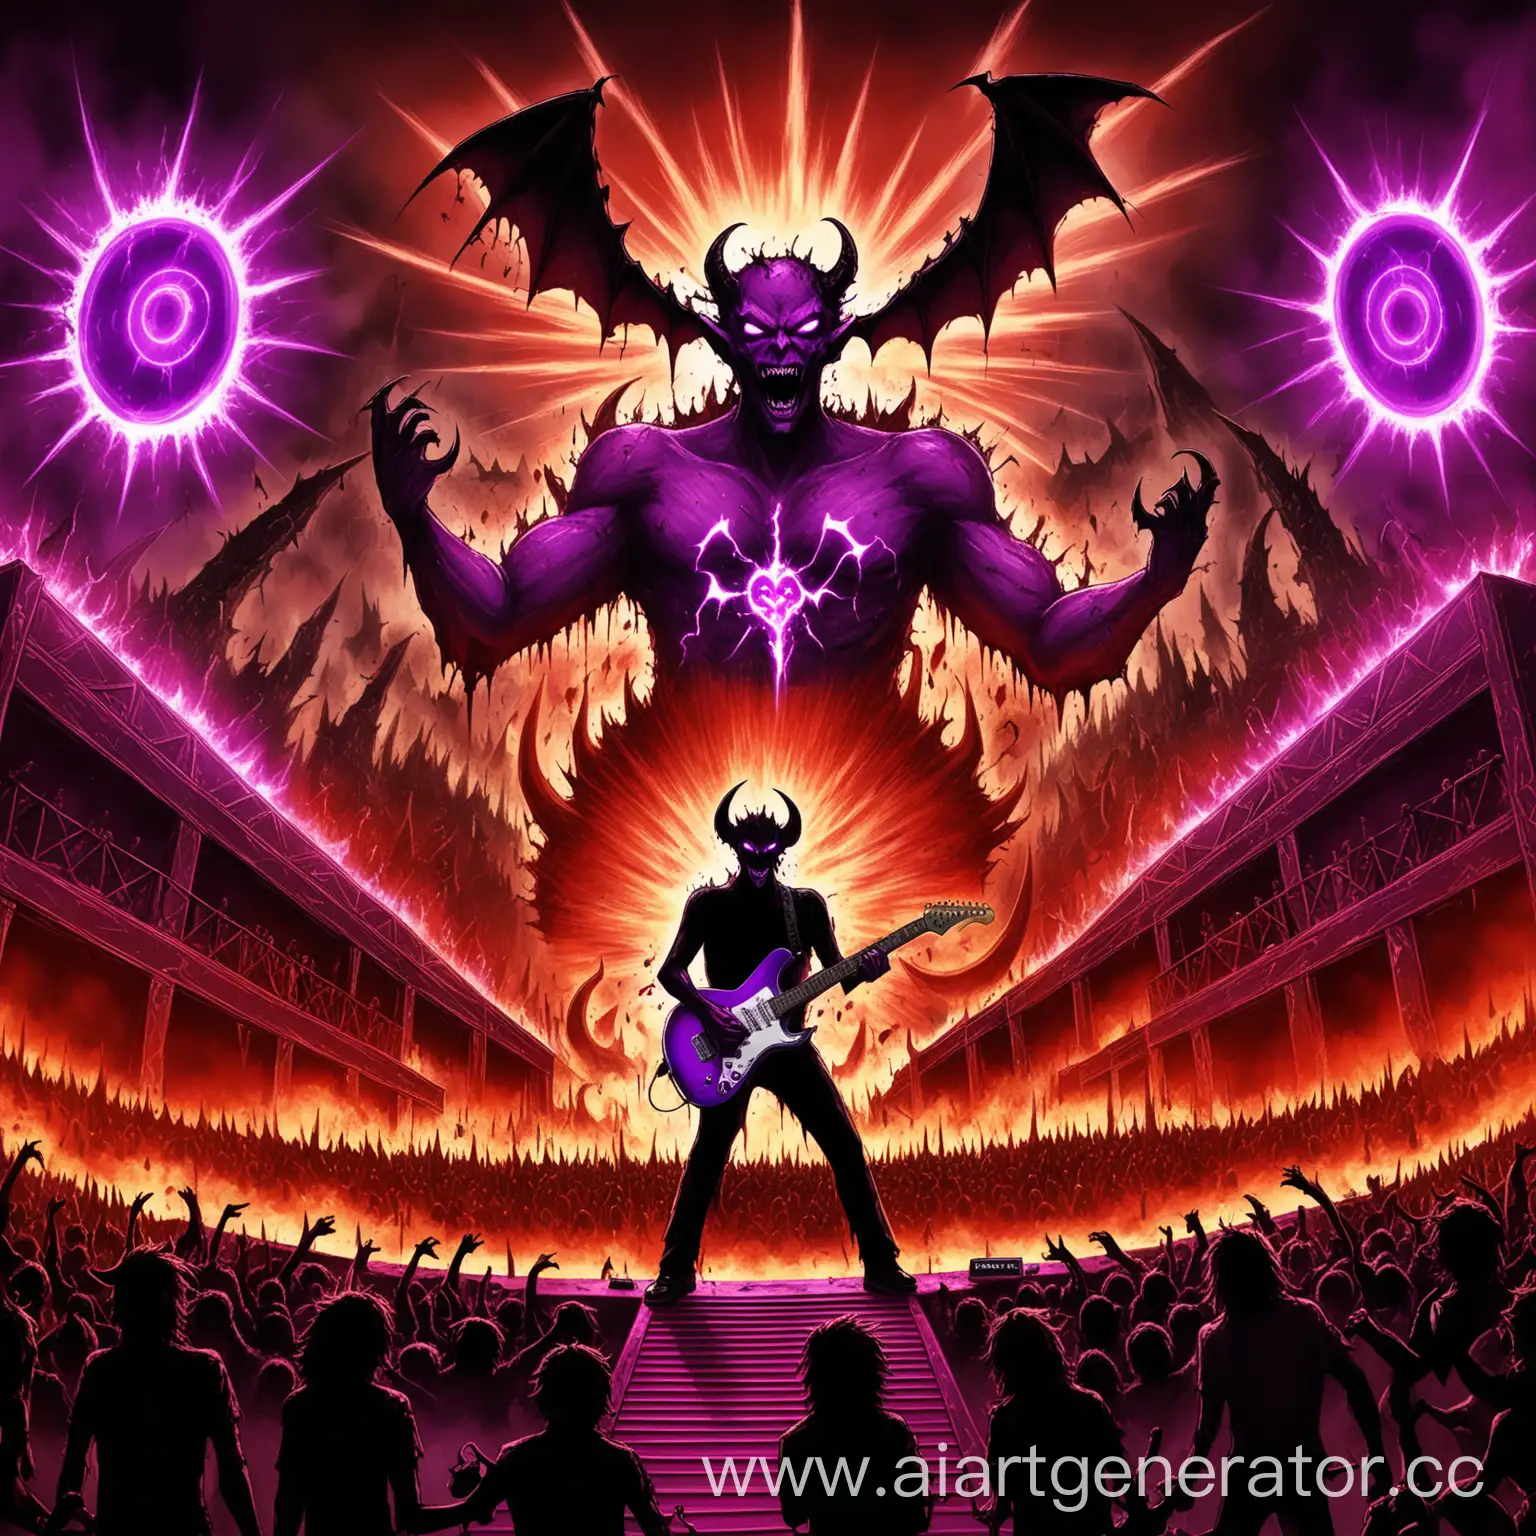 Demon-Guitarist-Rocks-Bloody-Stage-Amid-Epic-Explosions-and-Purple-Portal